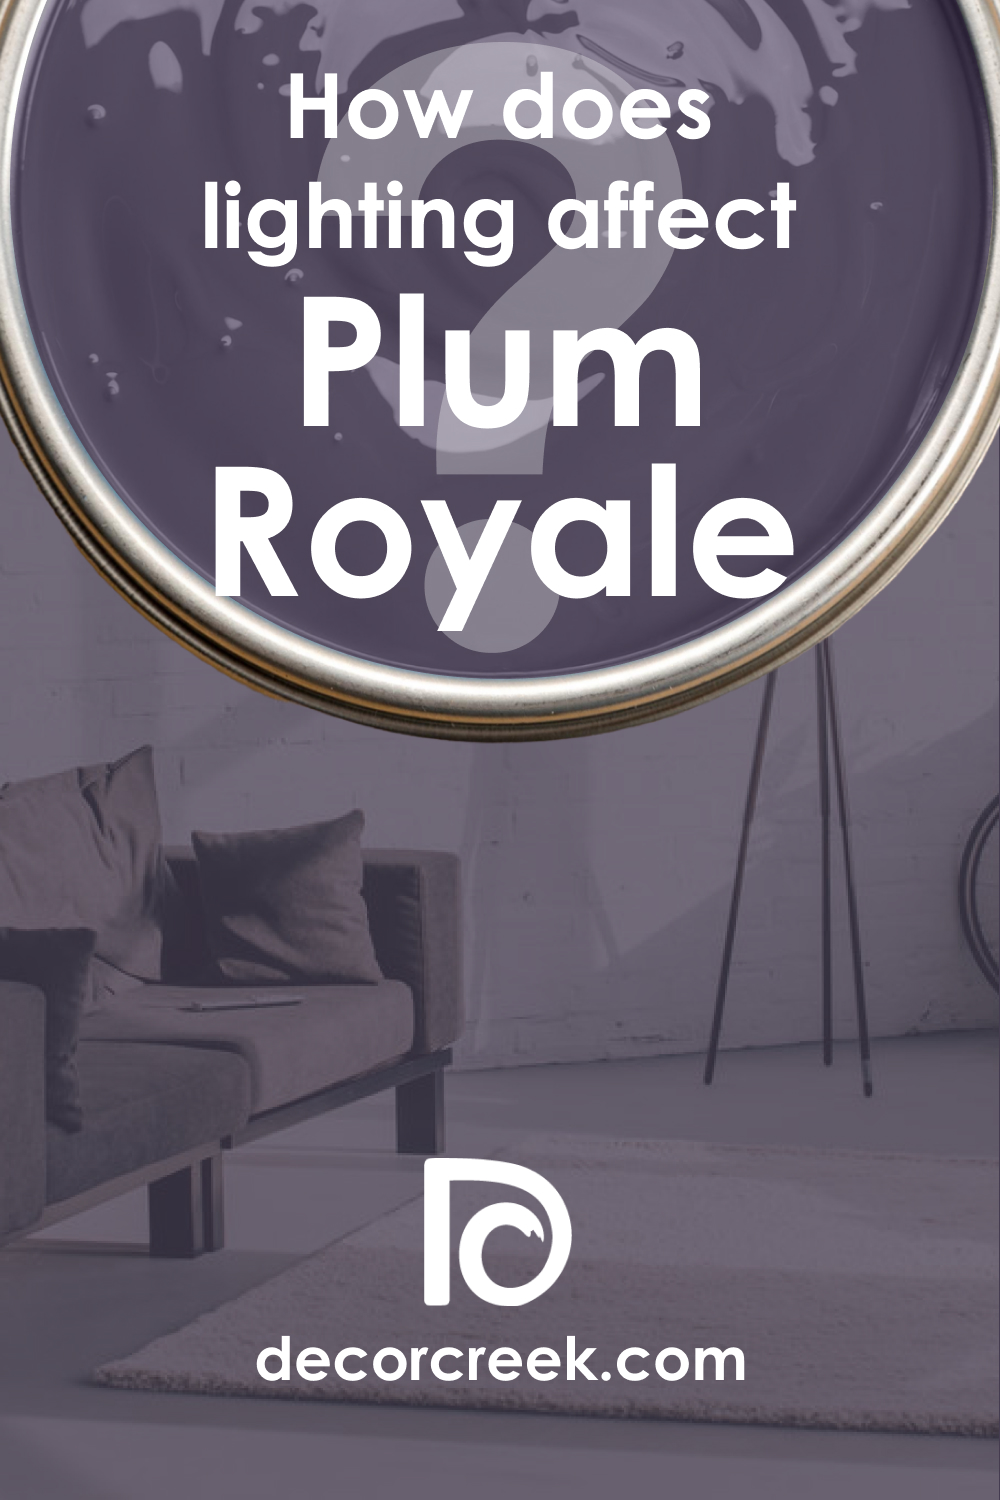 How Does Lighting Affect Plum Royale 2070-20?